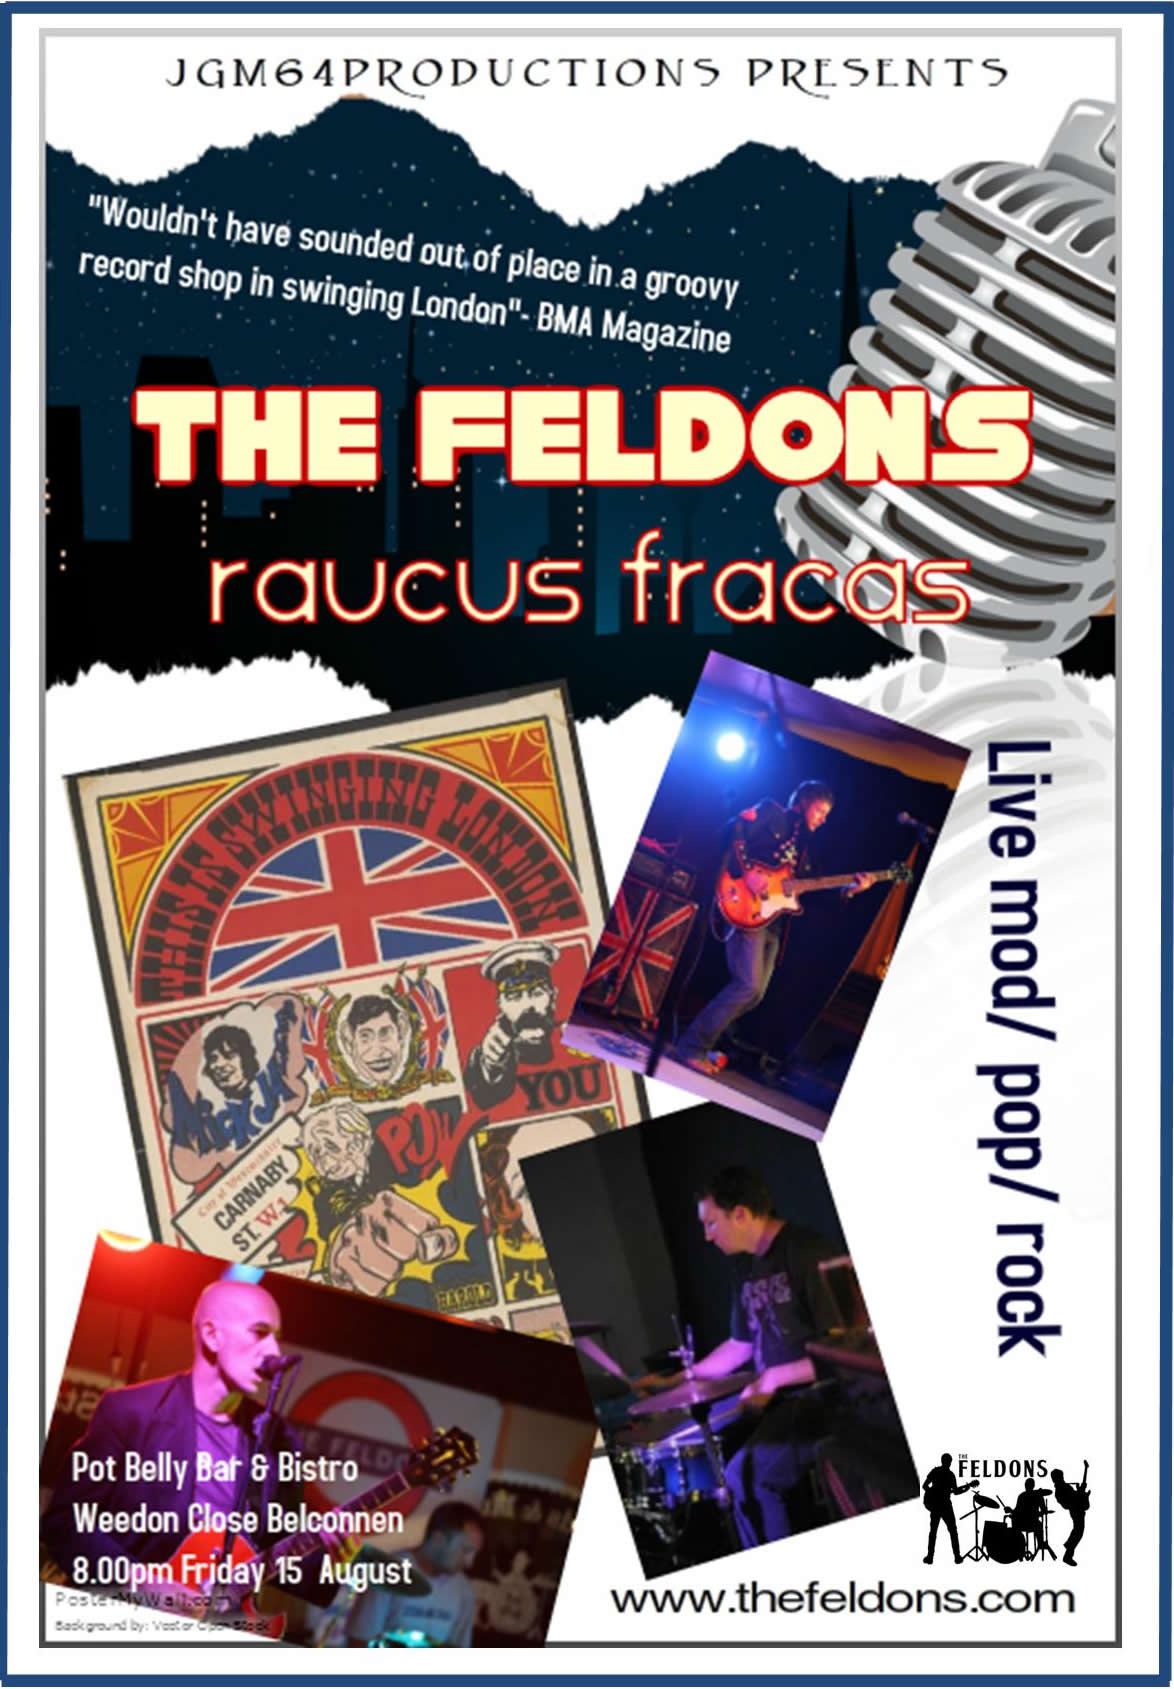 The Feldons and Raucus Fracas at the Pot- Friday 15 August